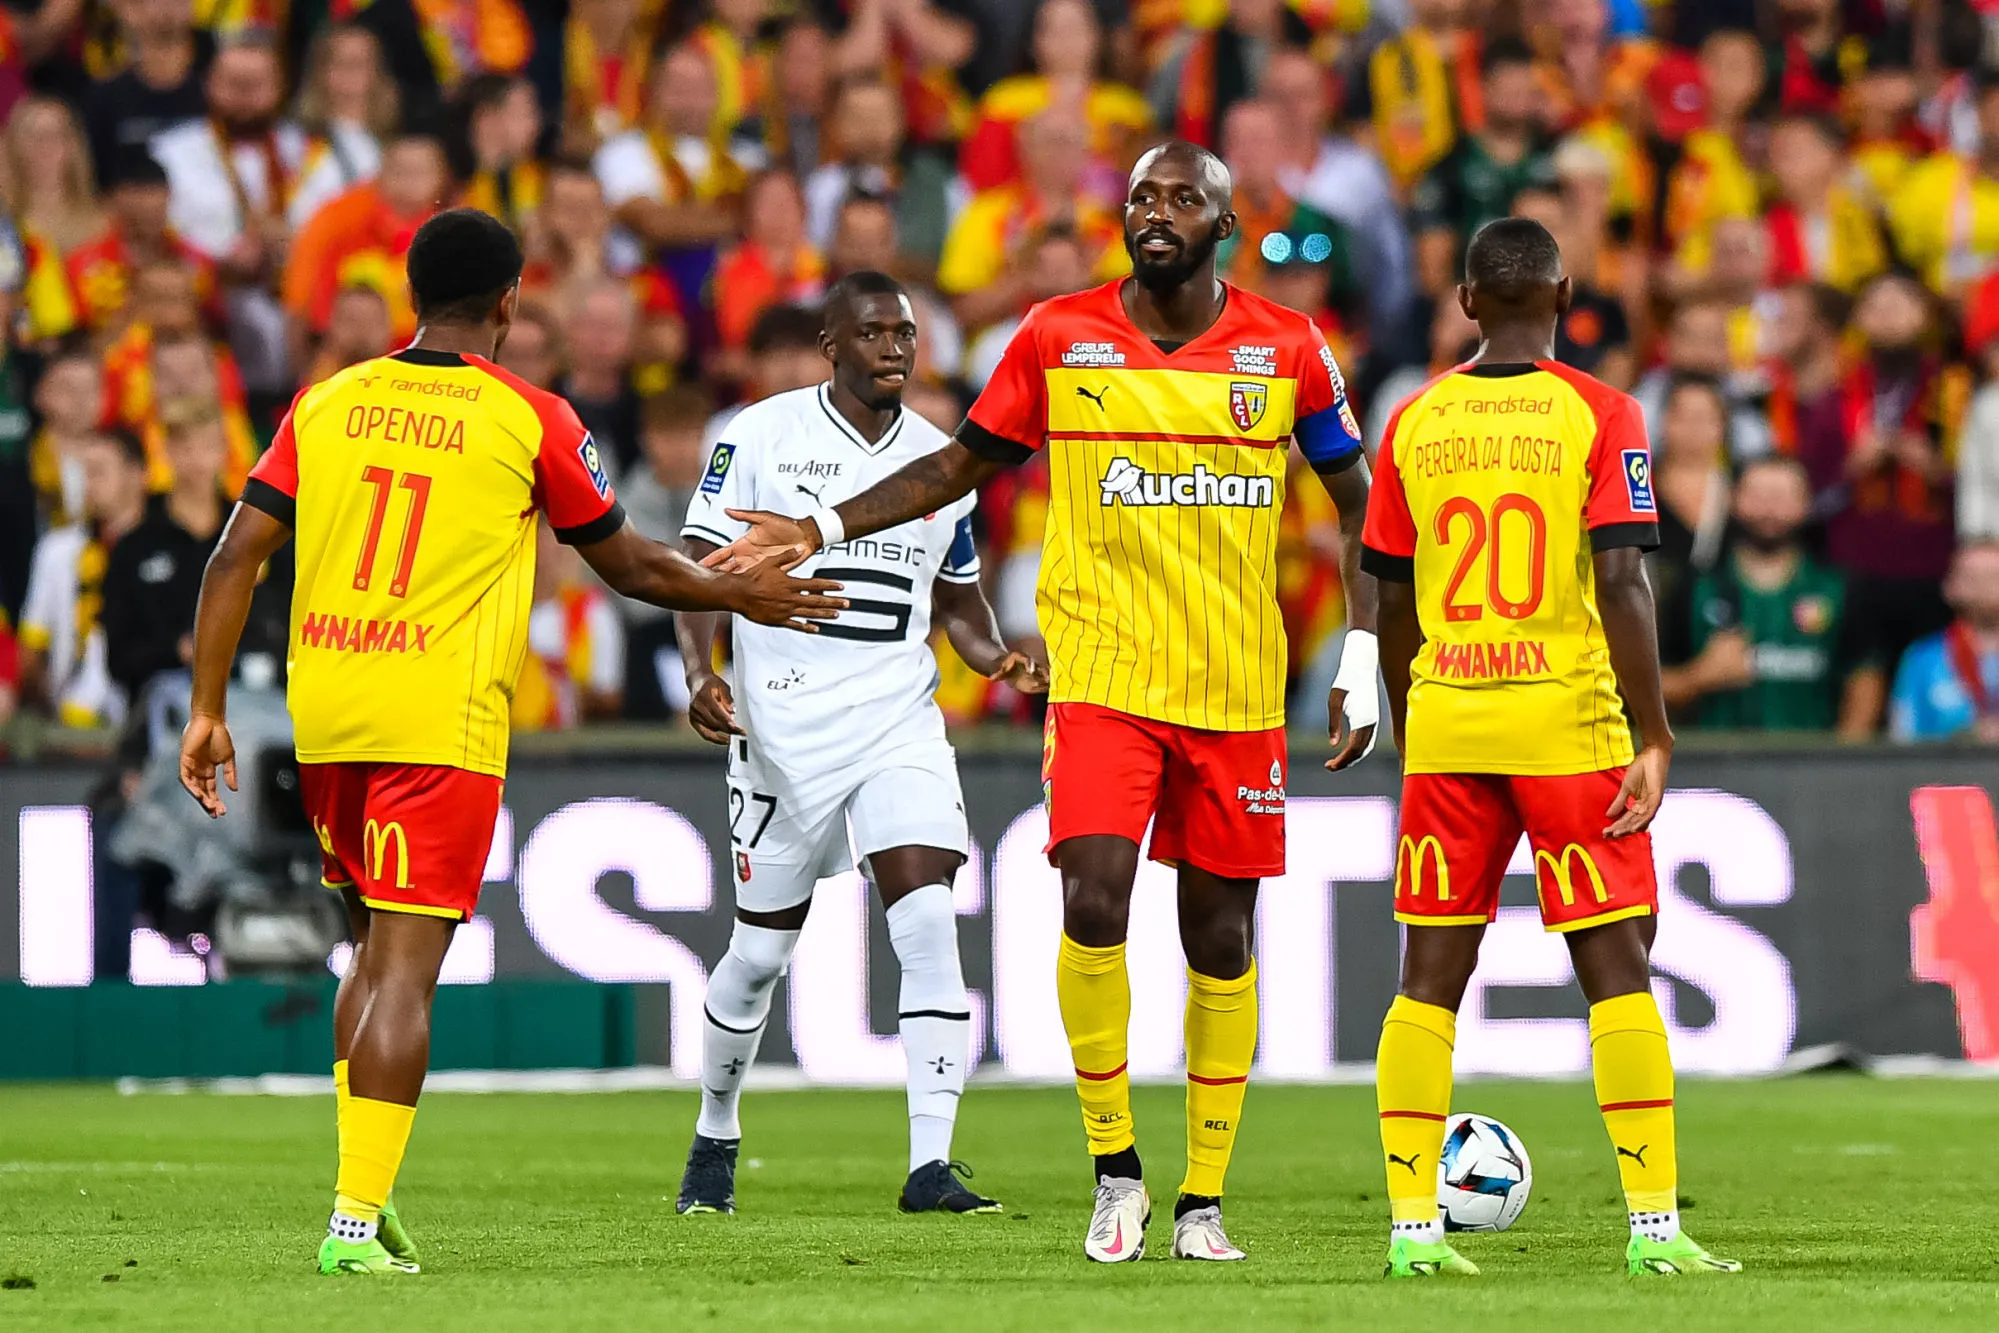 Seko FOFANA of Lens during the French Ligue 1 Uber Eats soccer match between Lens and Rennes at Stade Bollaert-Delelis on August 27, 2022 in Lens, France. (Photo by Baptiste Fernandez/Icon Sport)